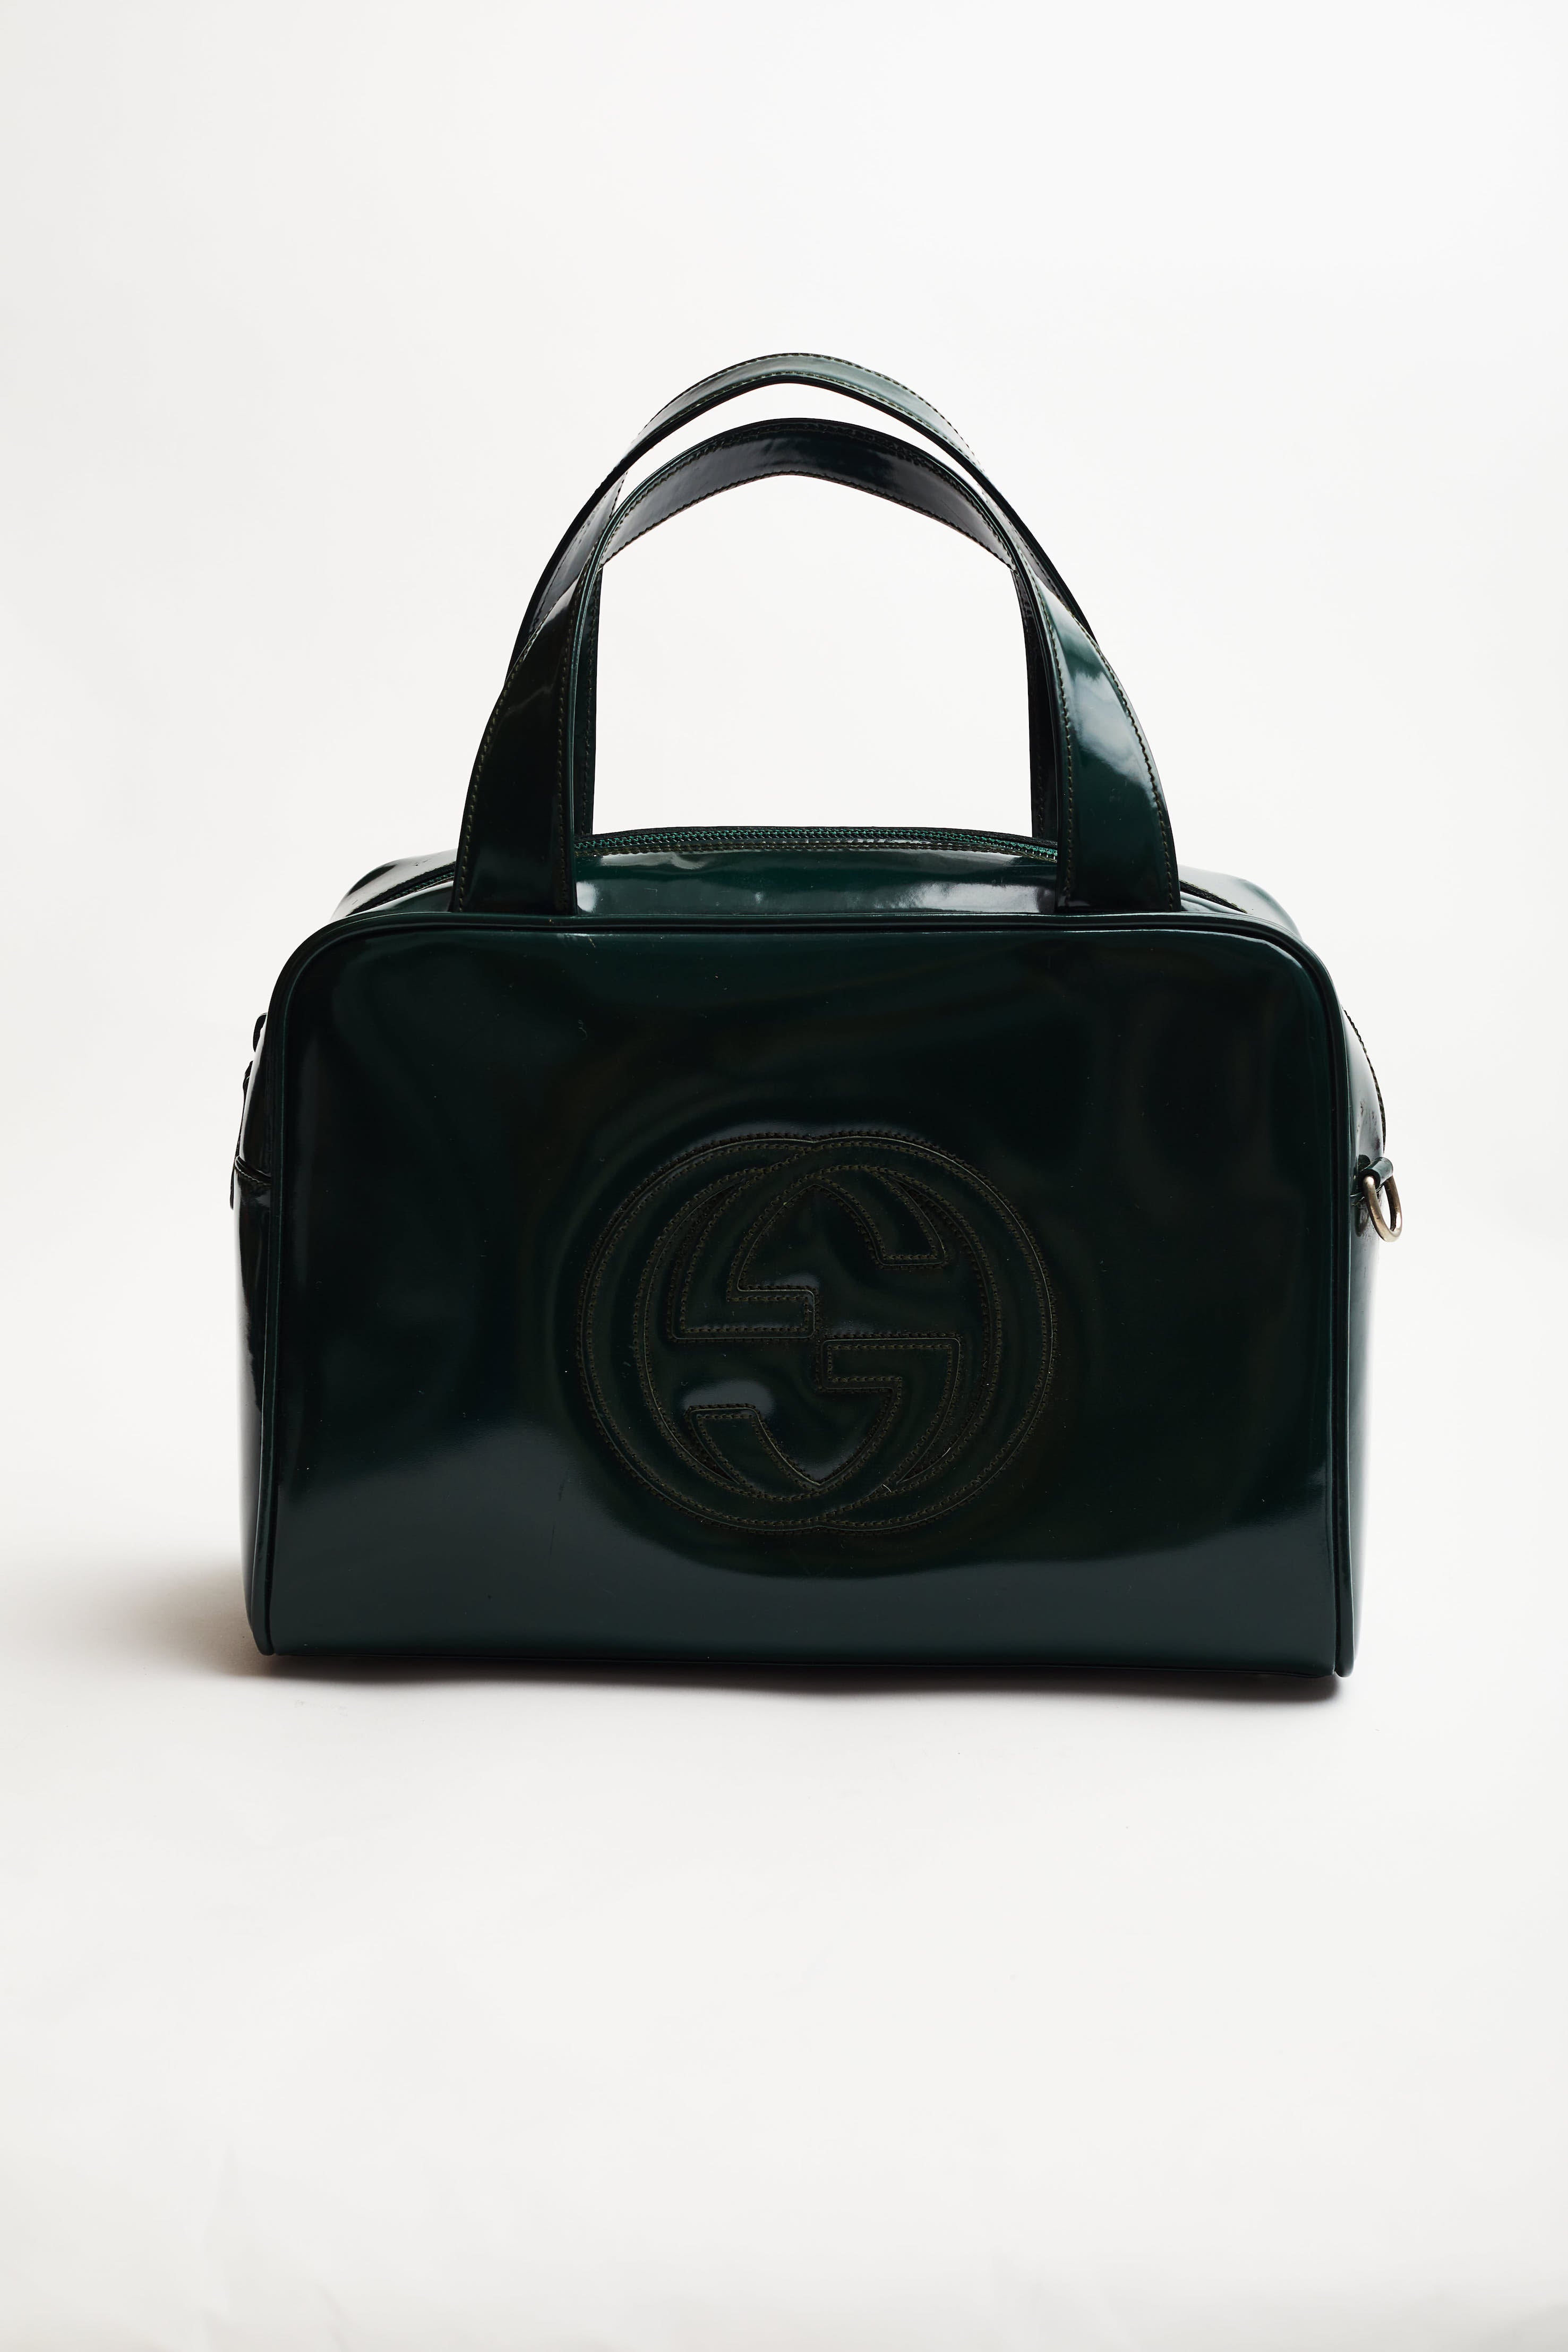 Gucci <br> 90's Gucci by Tom Ford two way patent leather logo bag